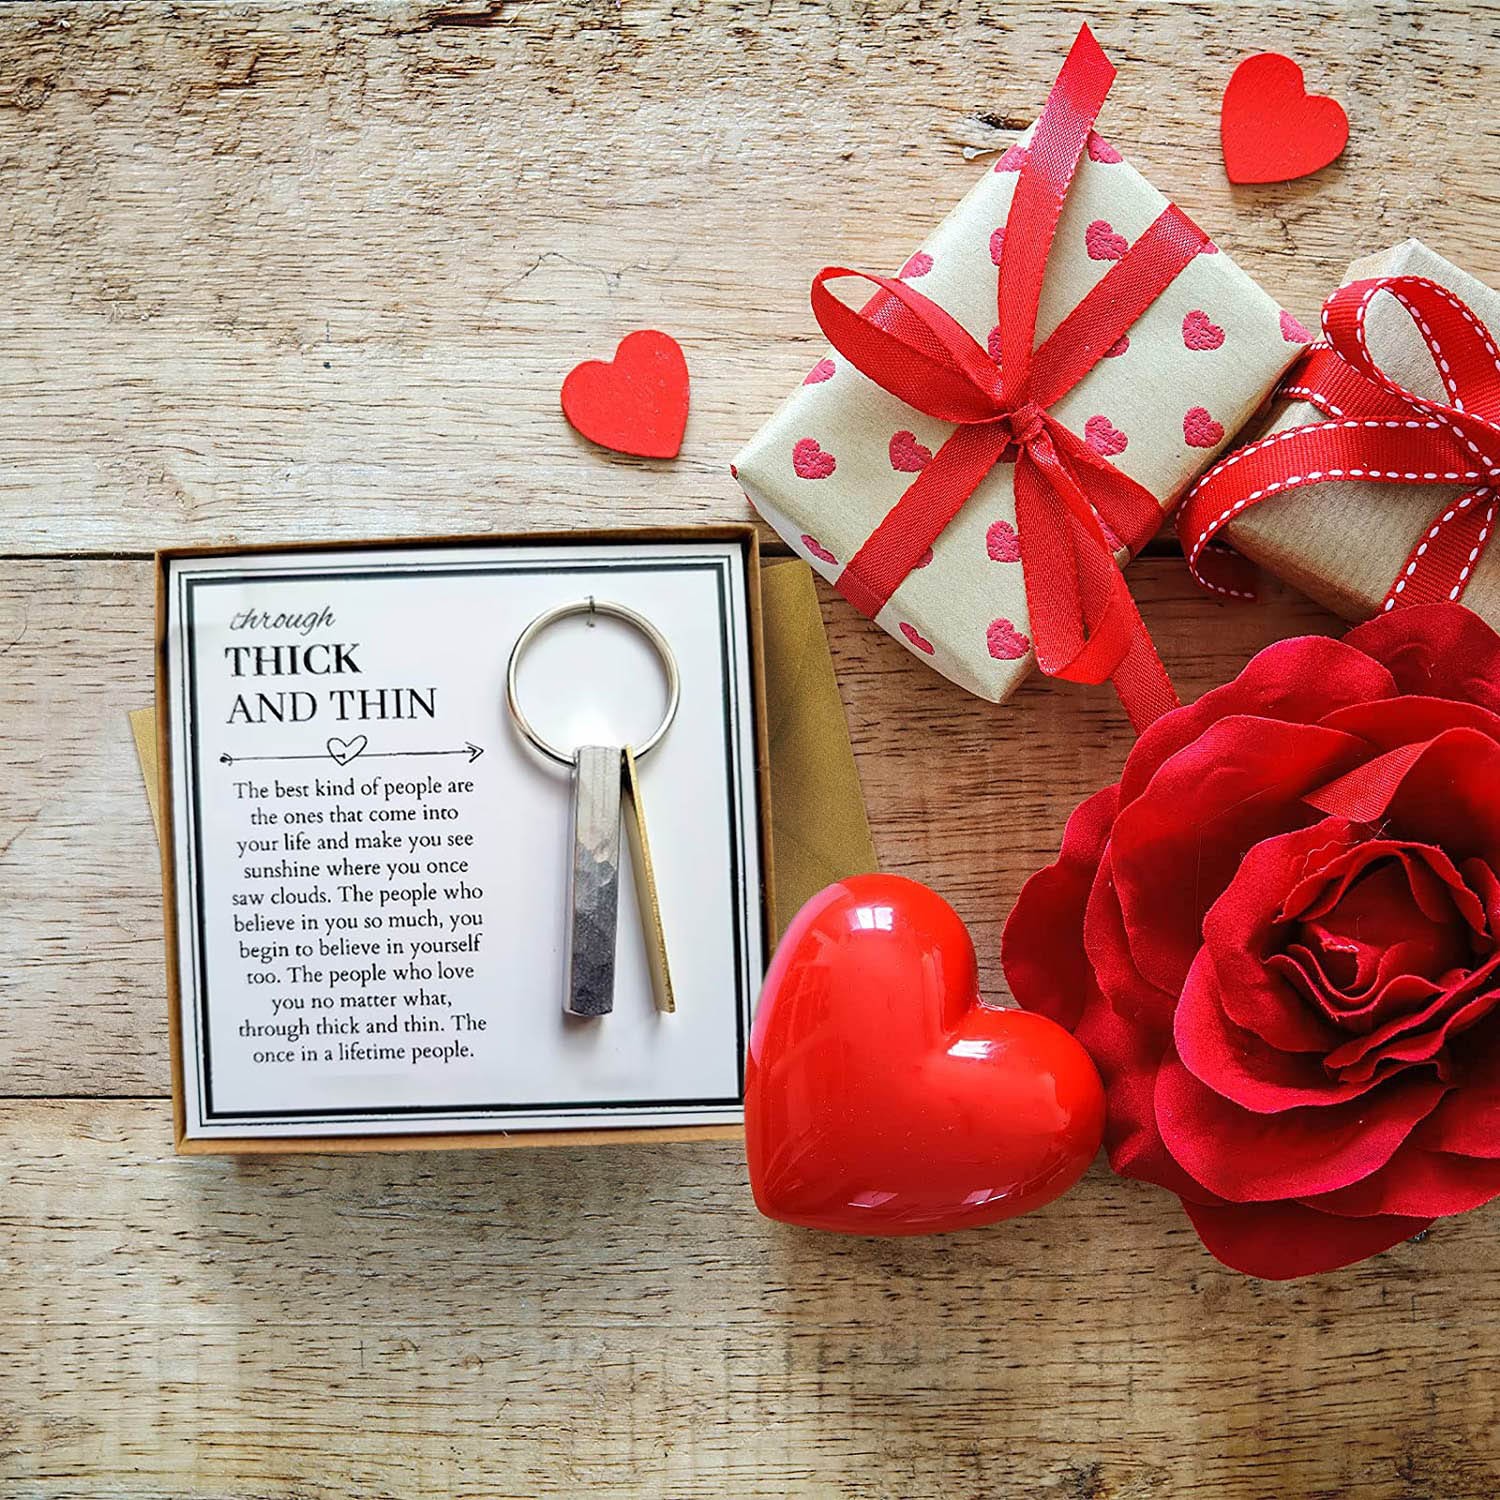 8 best gift ideas for her on Valentine's Day